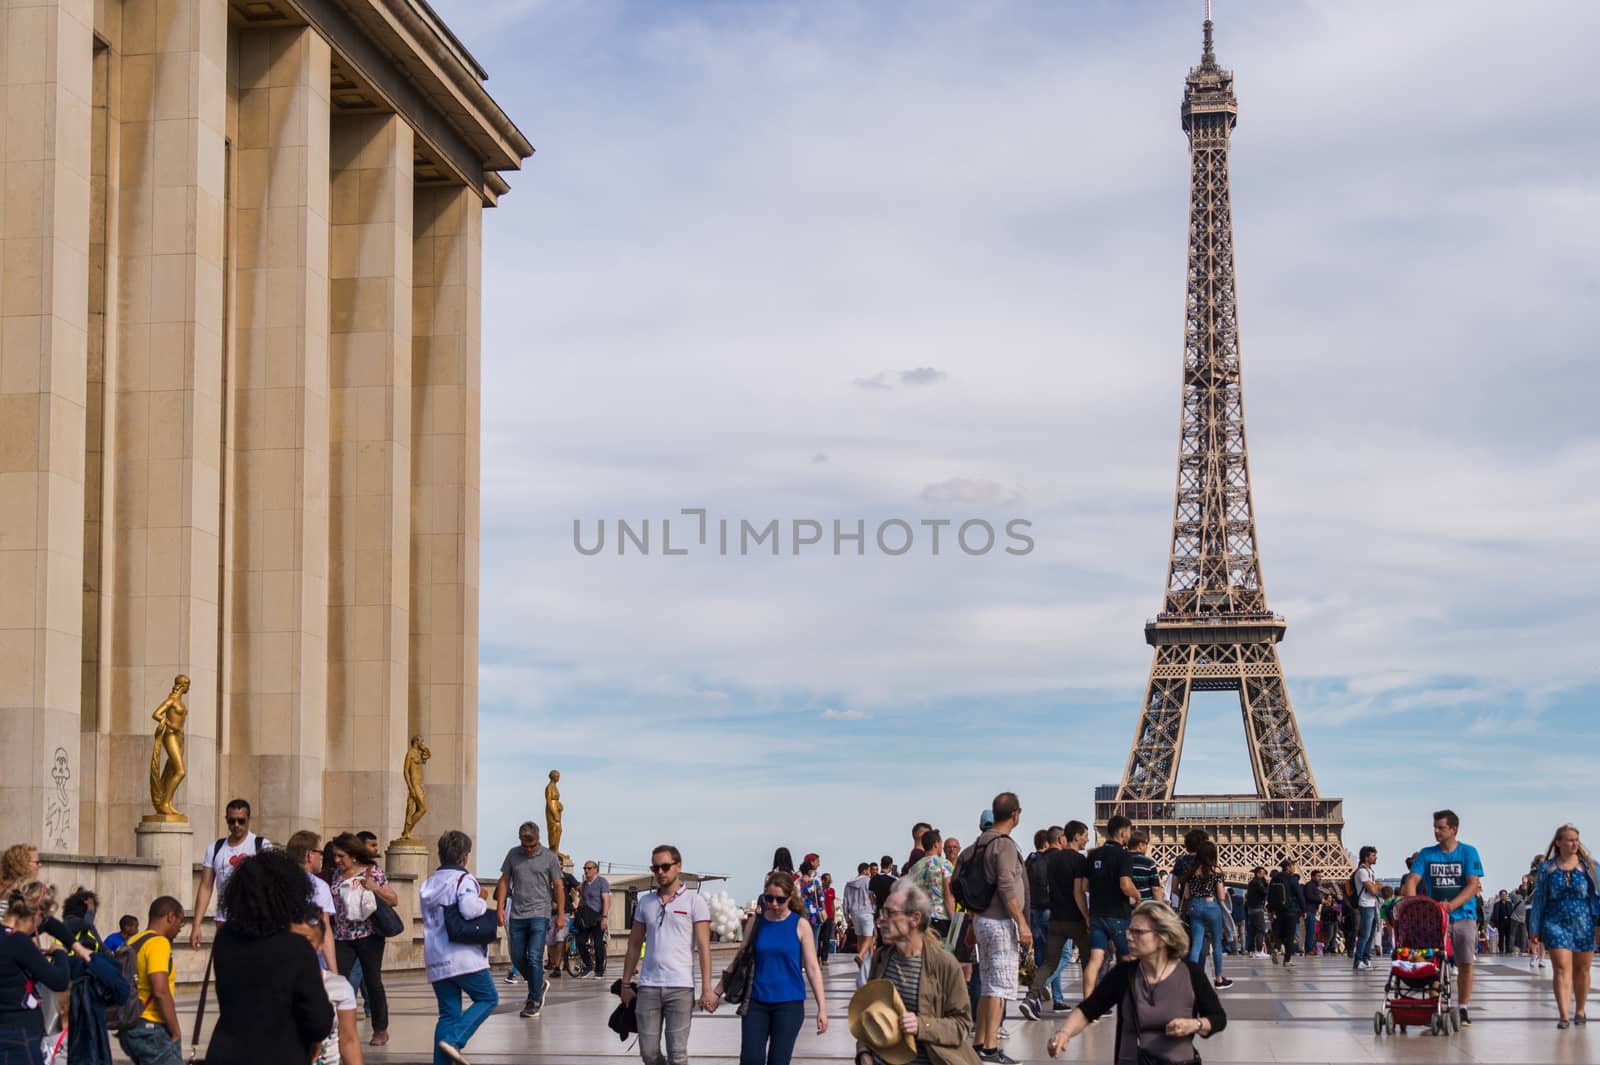 Eiffel Tower from Trocadero with many tourists in the foreground by mbruxelle